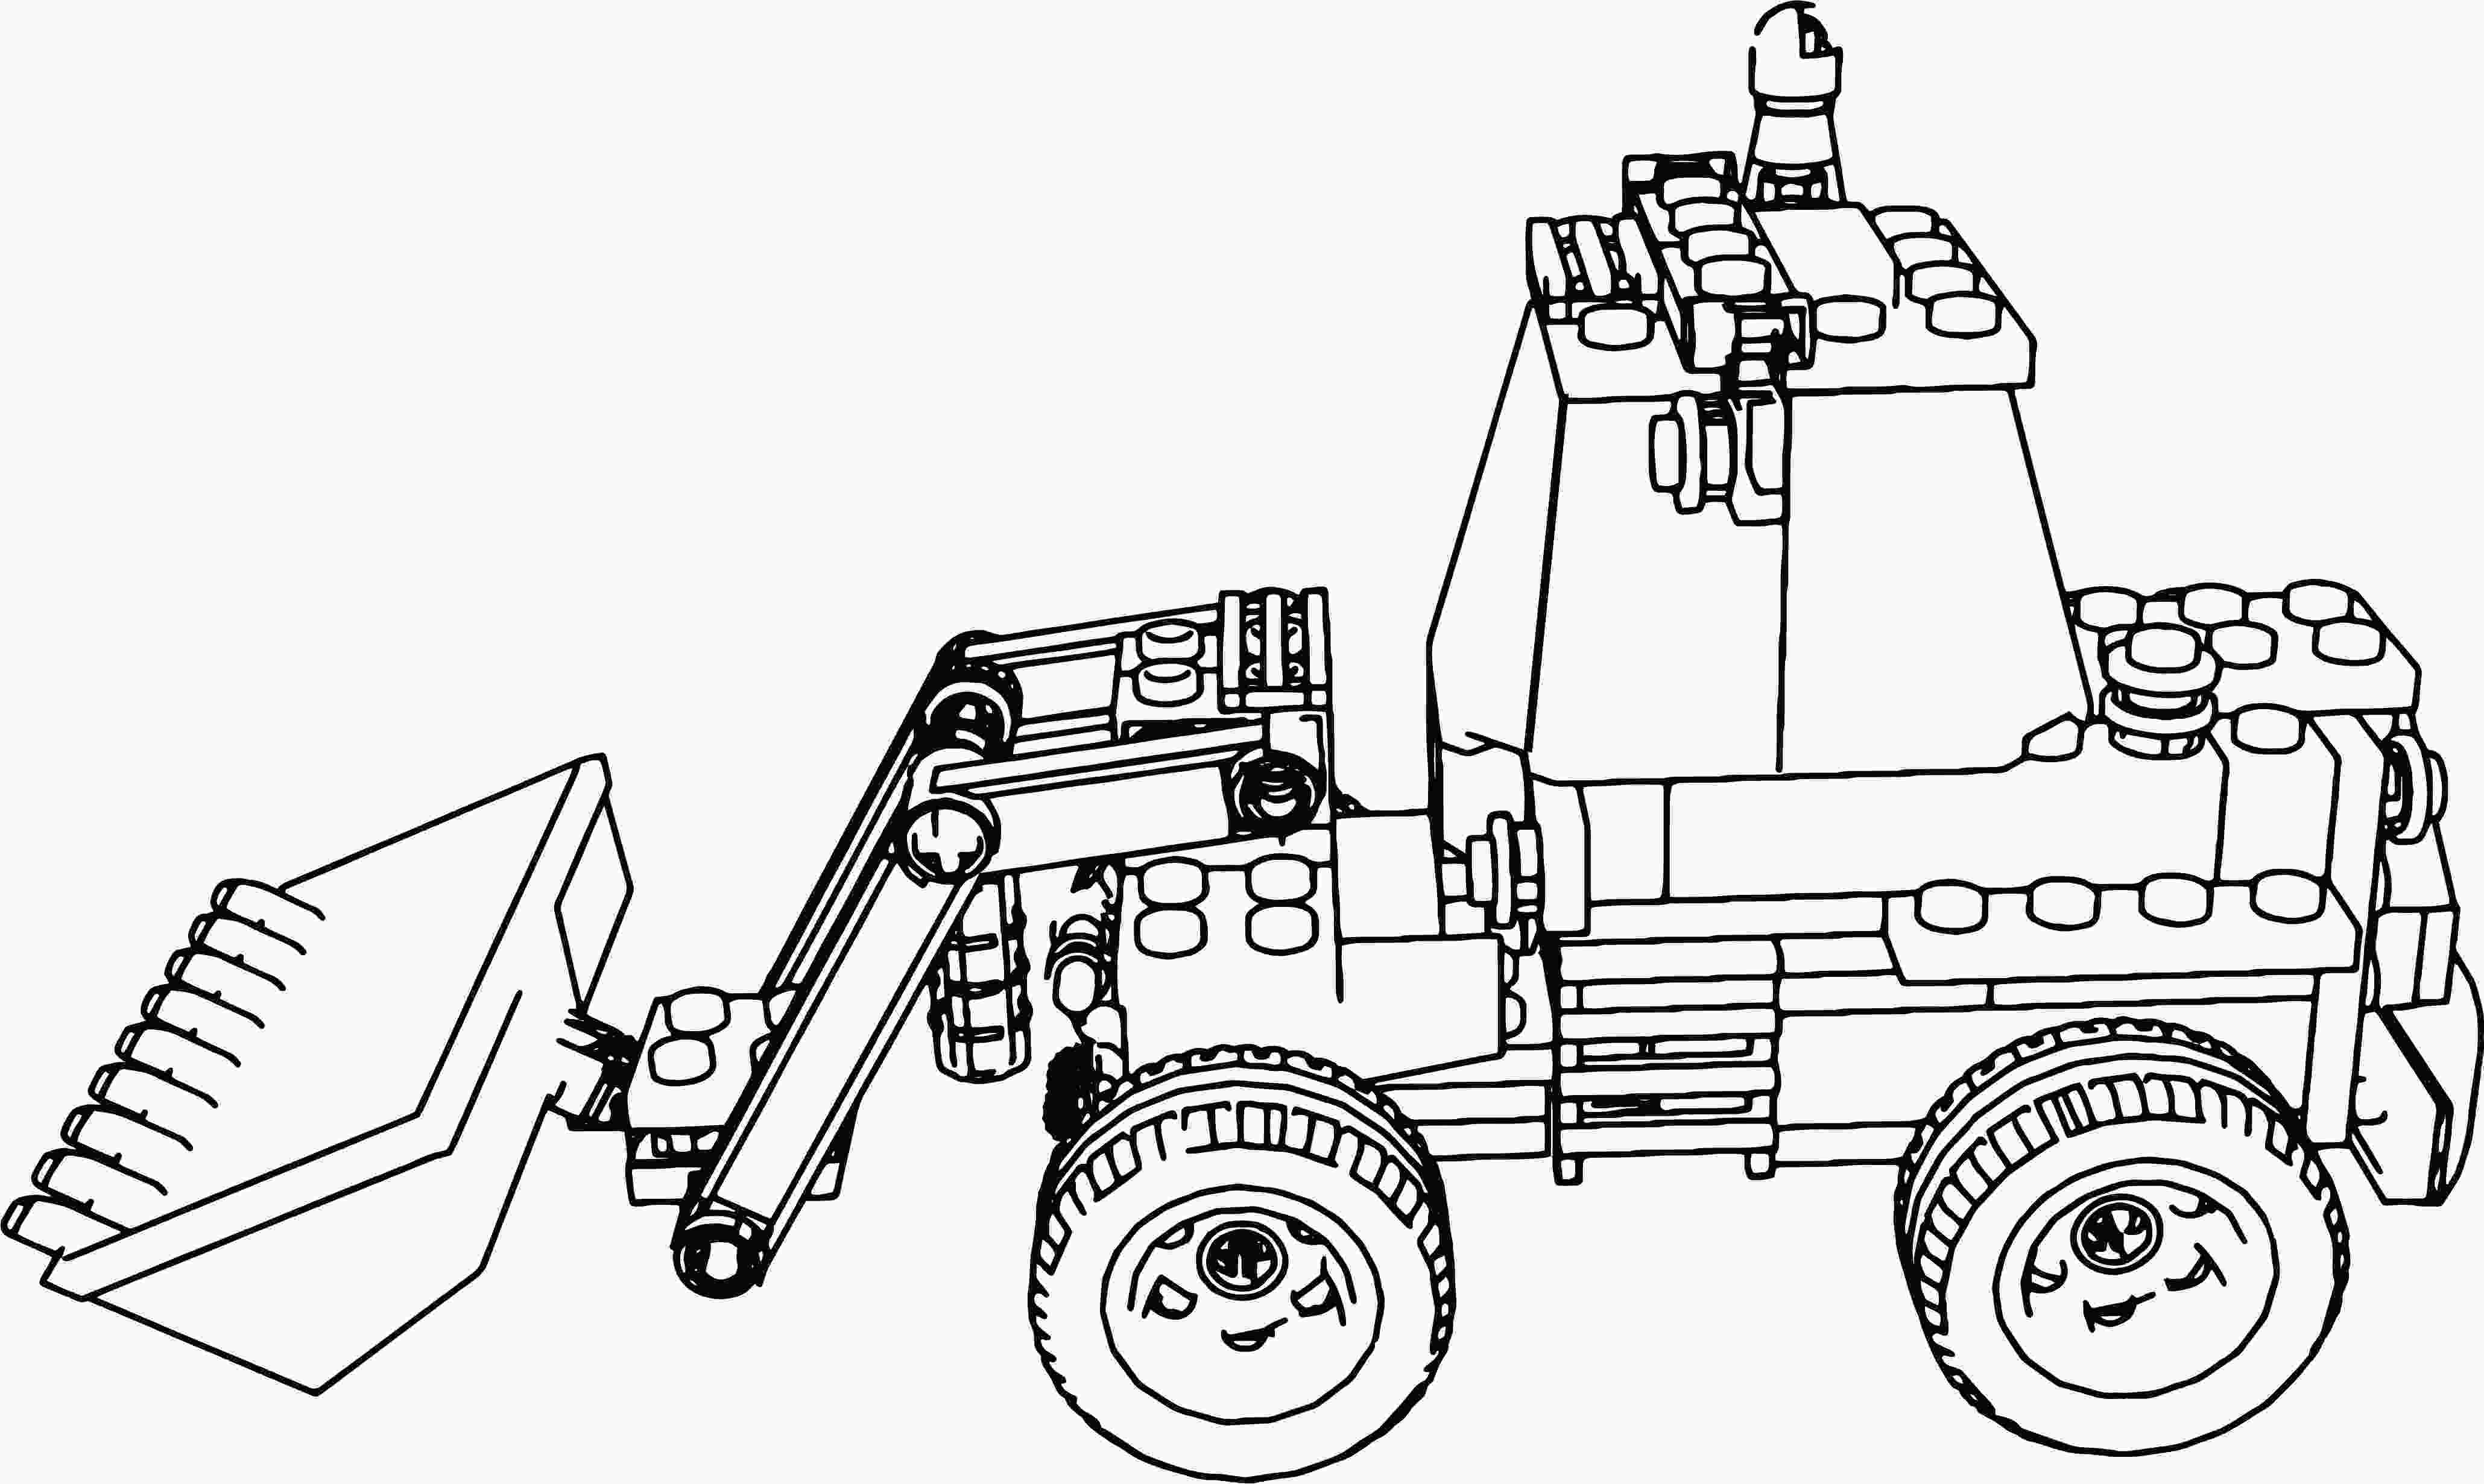 lego truck coloring pages lego firetruck with fireman coloring page for kids coloring truck lego pages 